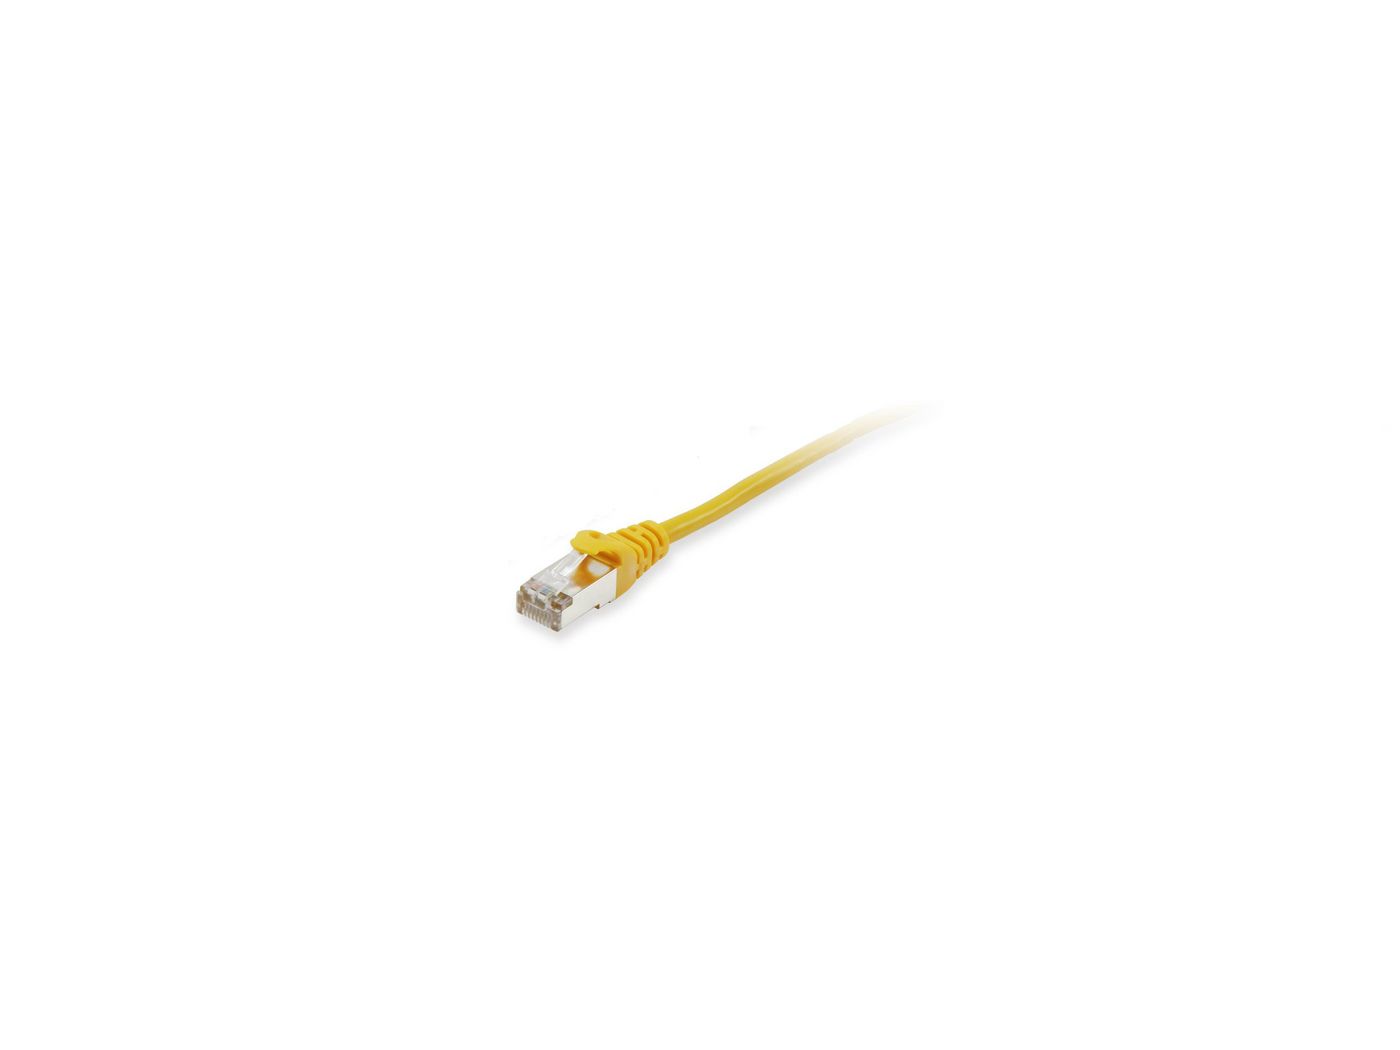 Equip 705860 W128286446 Networking Cable Yellow 30 M 